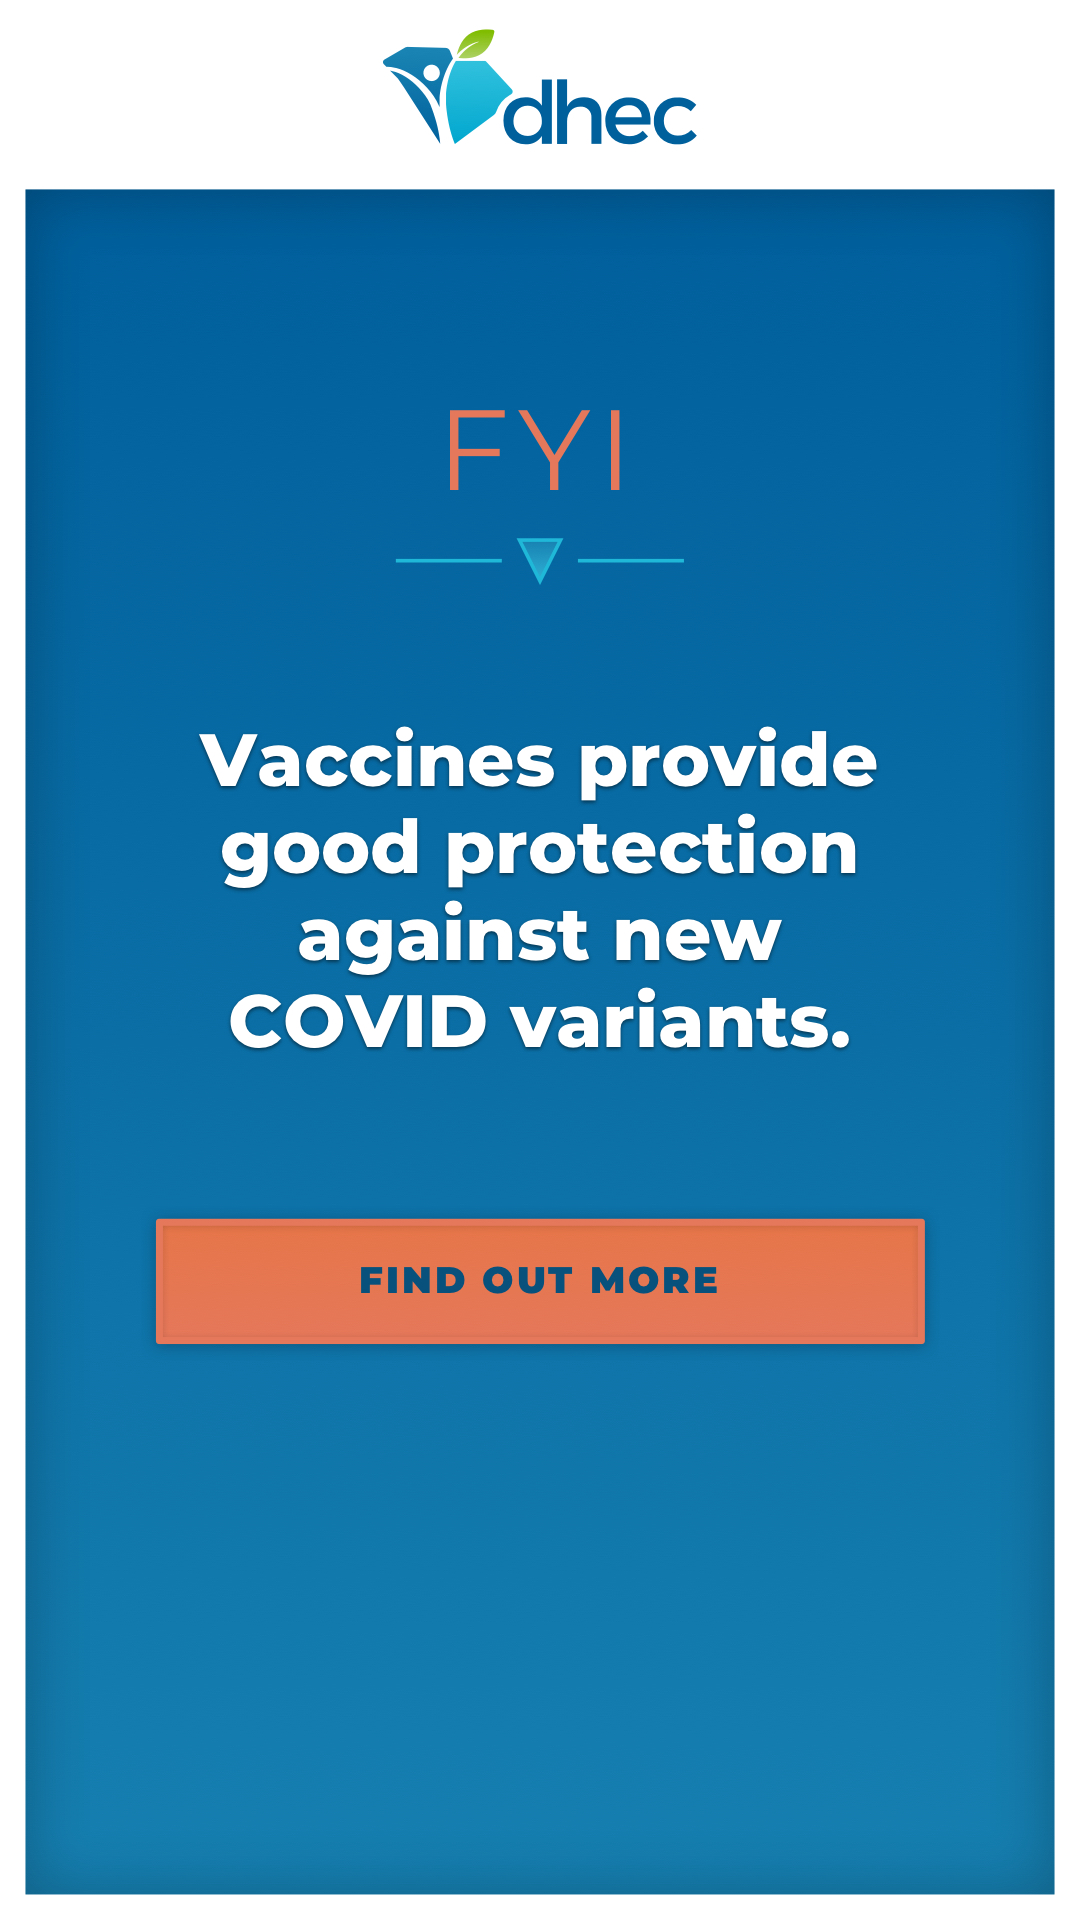 Vaccines provide good protection against new COVID variants.